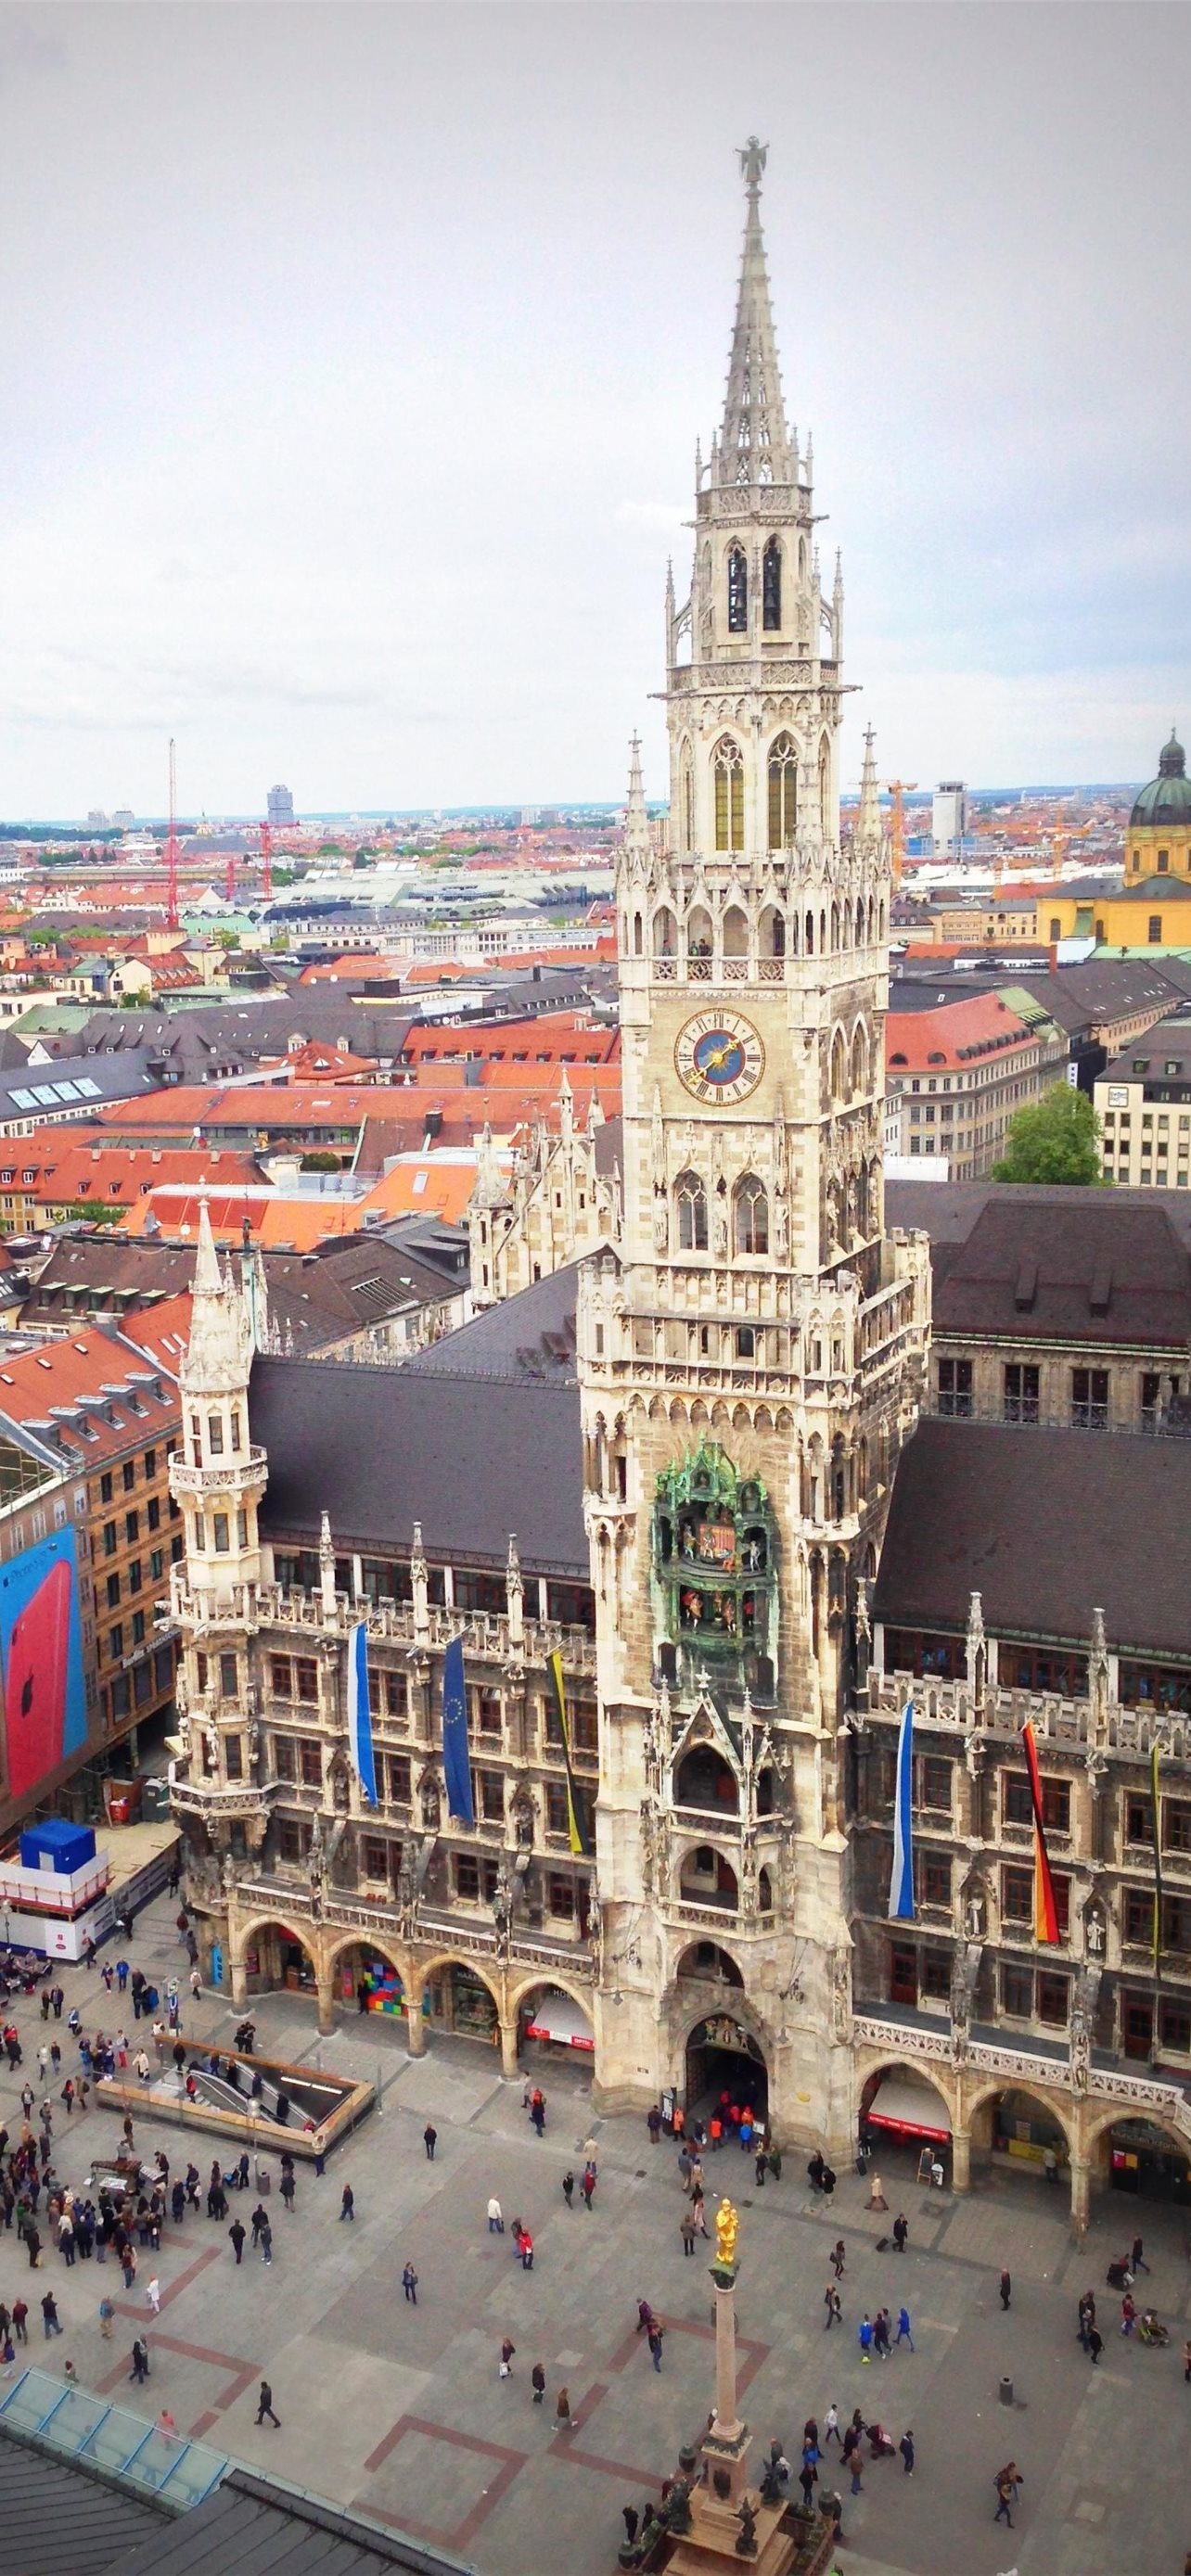 Munich: The city was declared the "Capital of the Movement" by the Nazi Party. 1290x2780 HD Background.